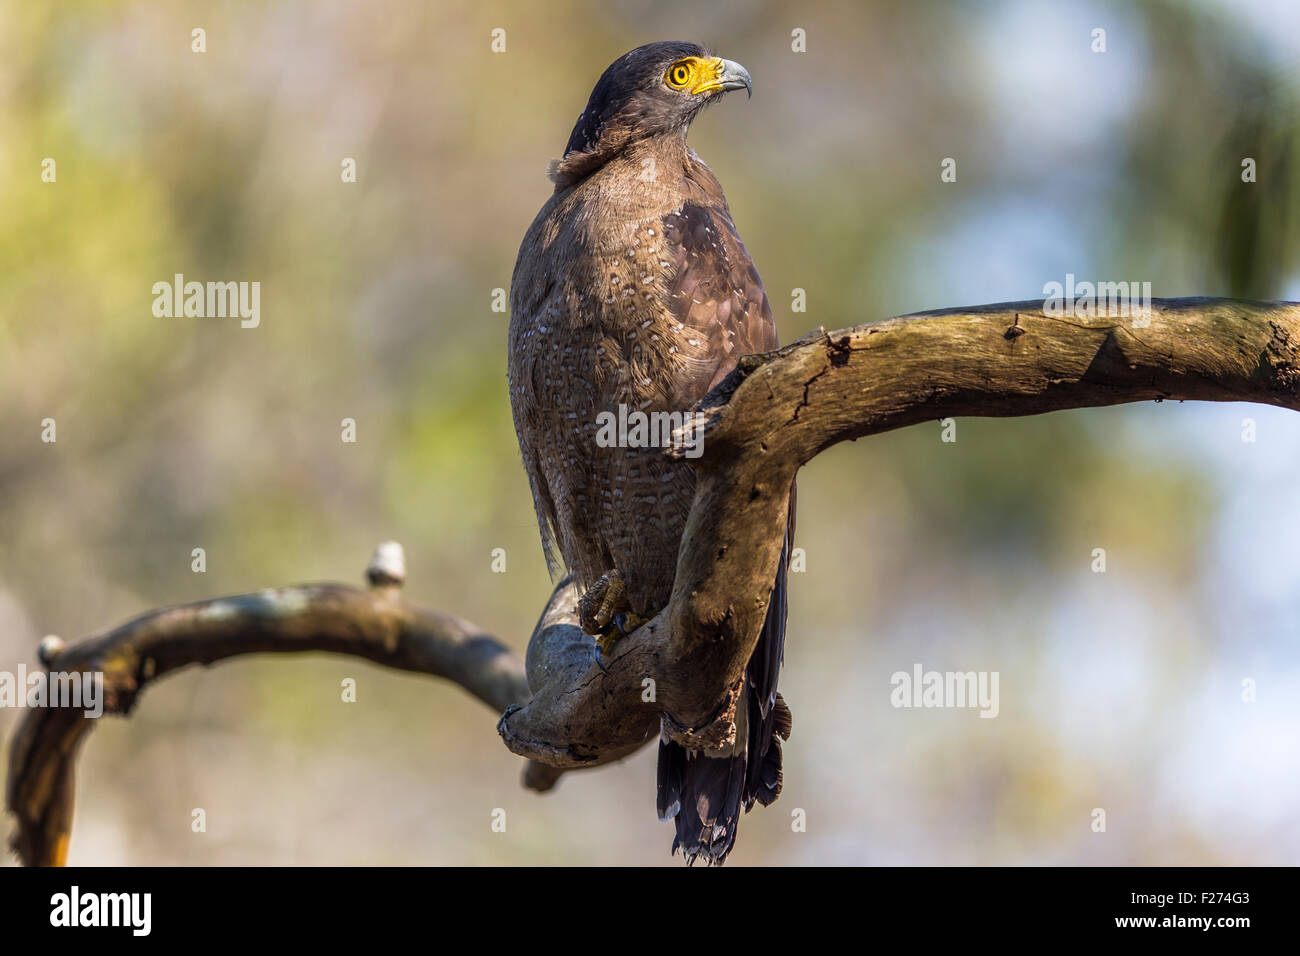 Crested Eagle serpente a Jim Corbet National Park, India. Foto Stock